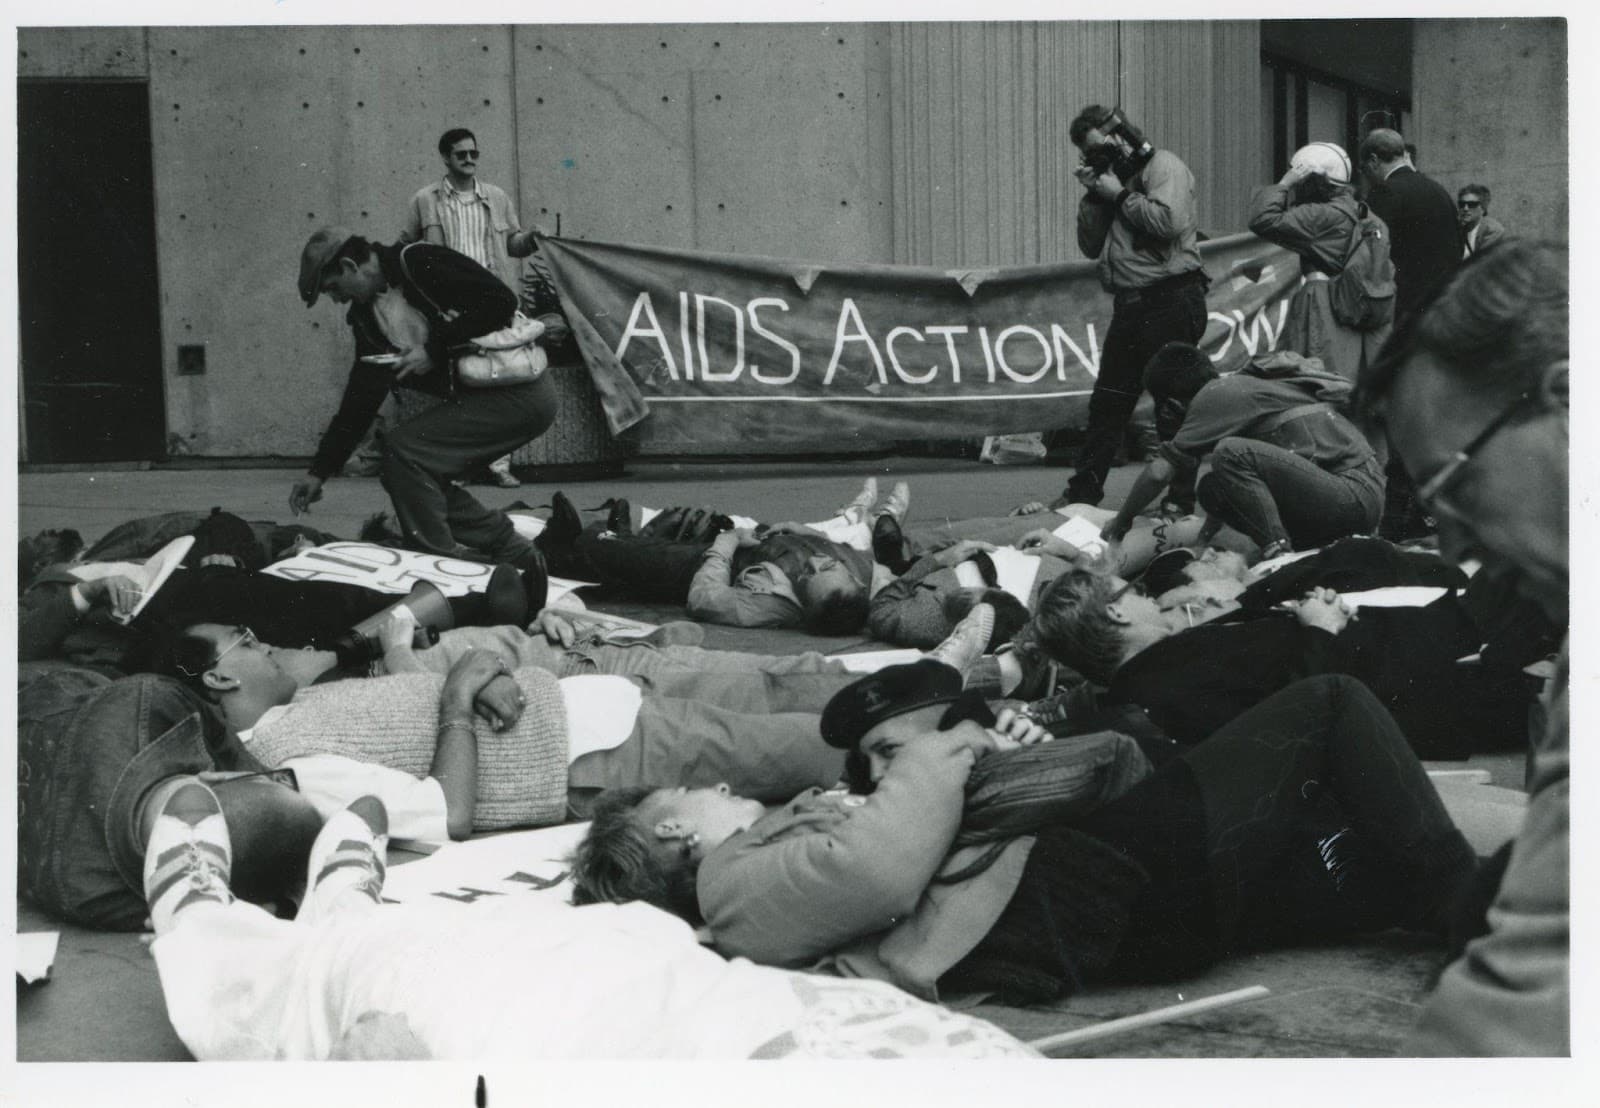 Black and white photo of people lying on the ground, with a photographer taking photos and two people holding a banner reading "AID Action Now"